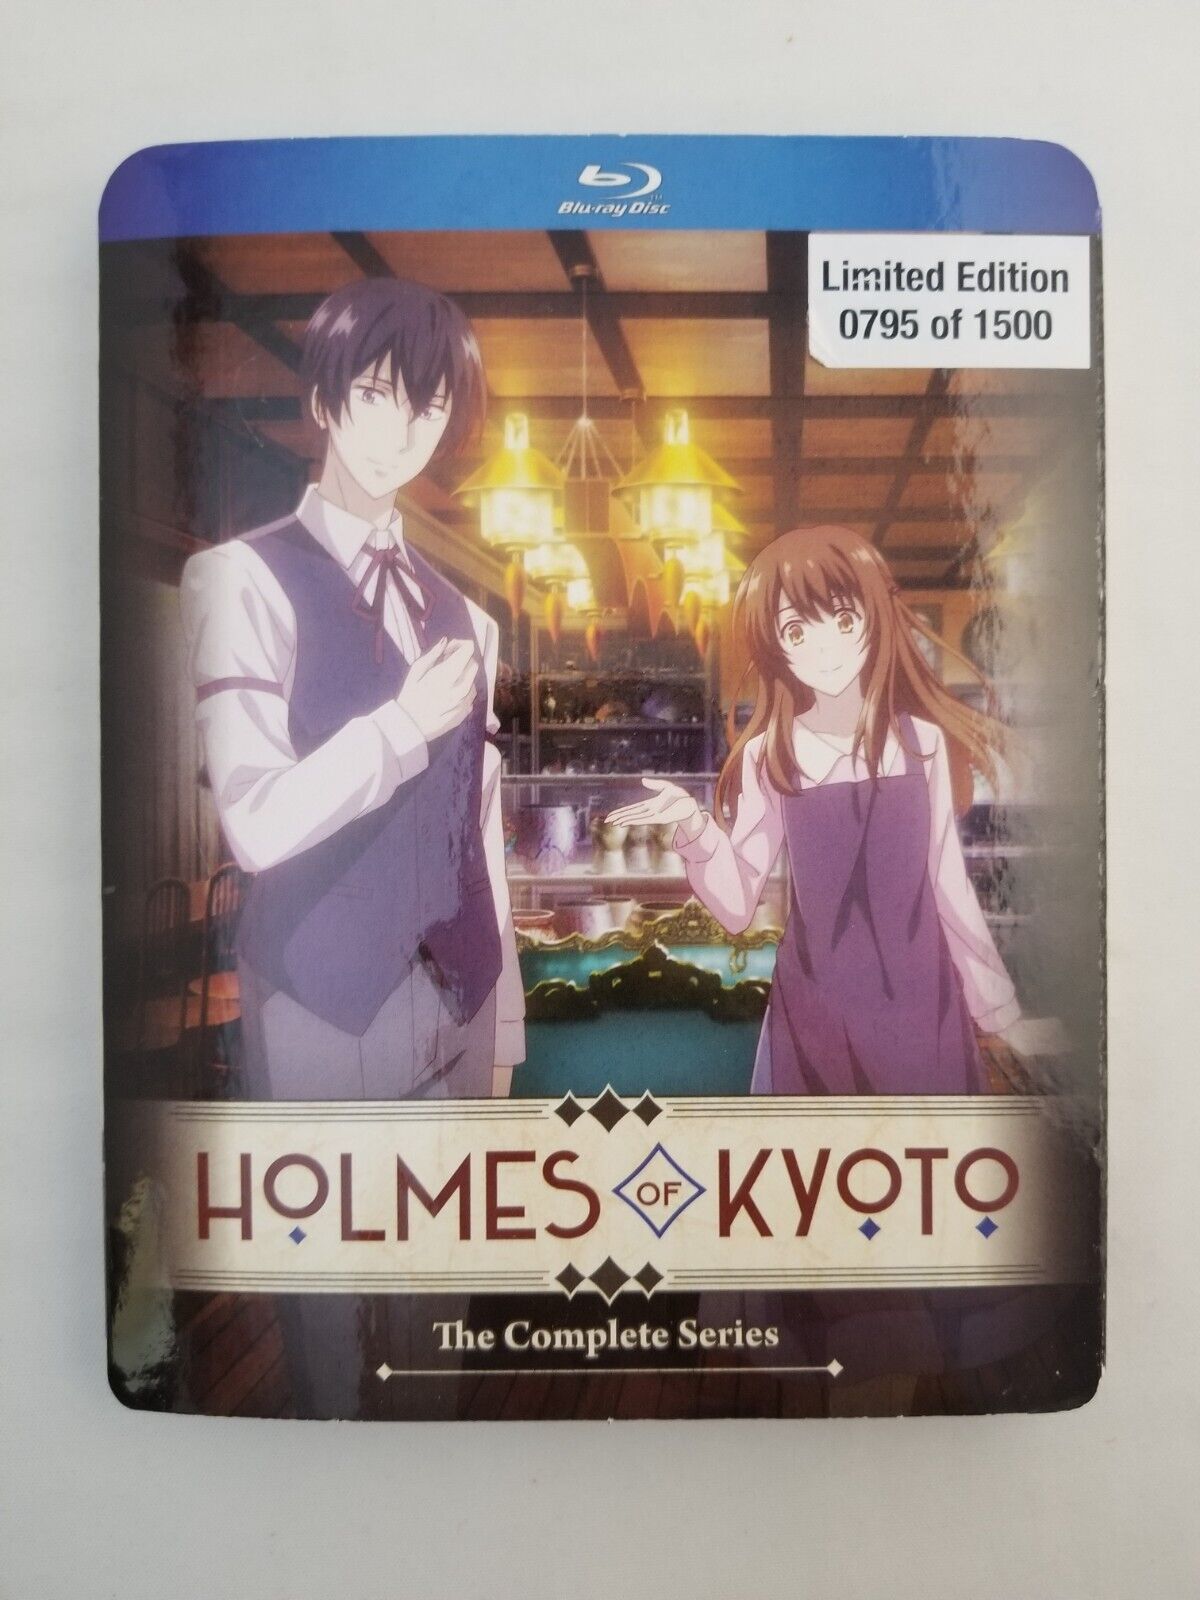 Holmes of Kyoto Blu-ray anime Complete Collection Full Series 12 episodes  bluray | eBay